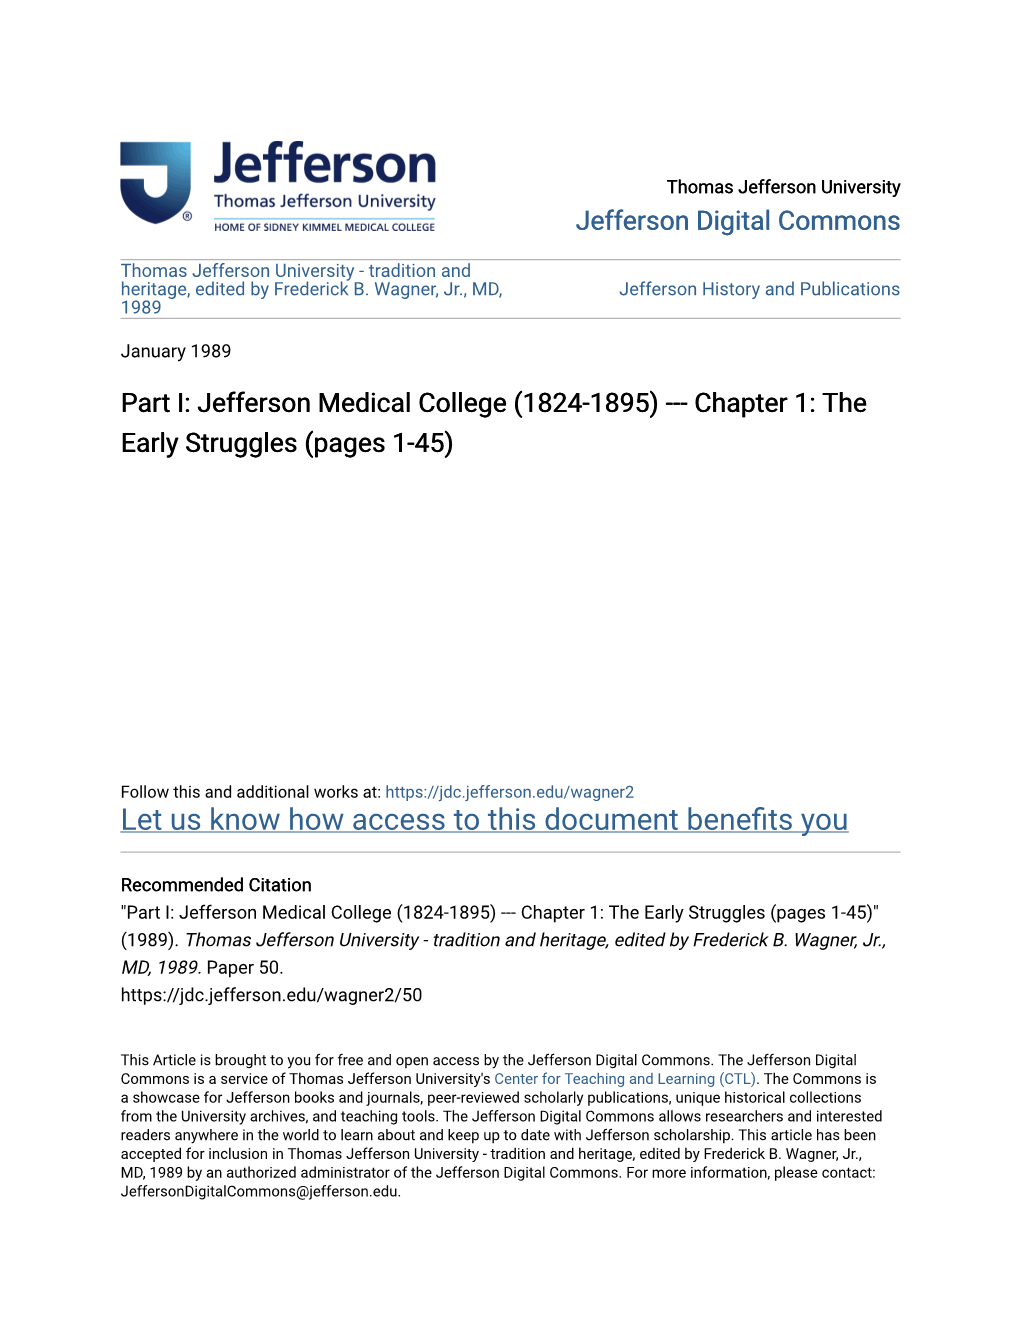 Jefferson Medical College (1824-1895) --- Chapter 1: the Early Struggles (Pages 1-45)